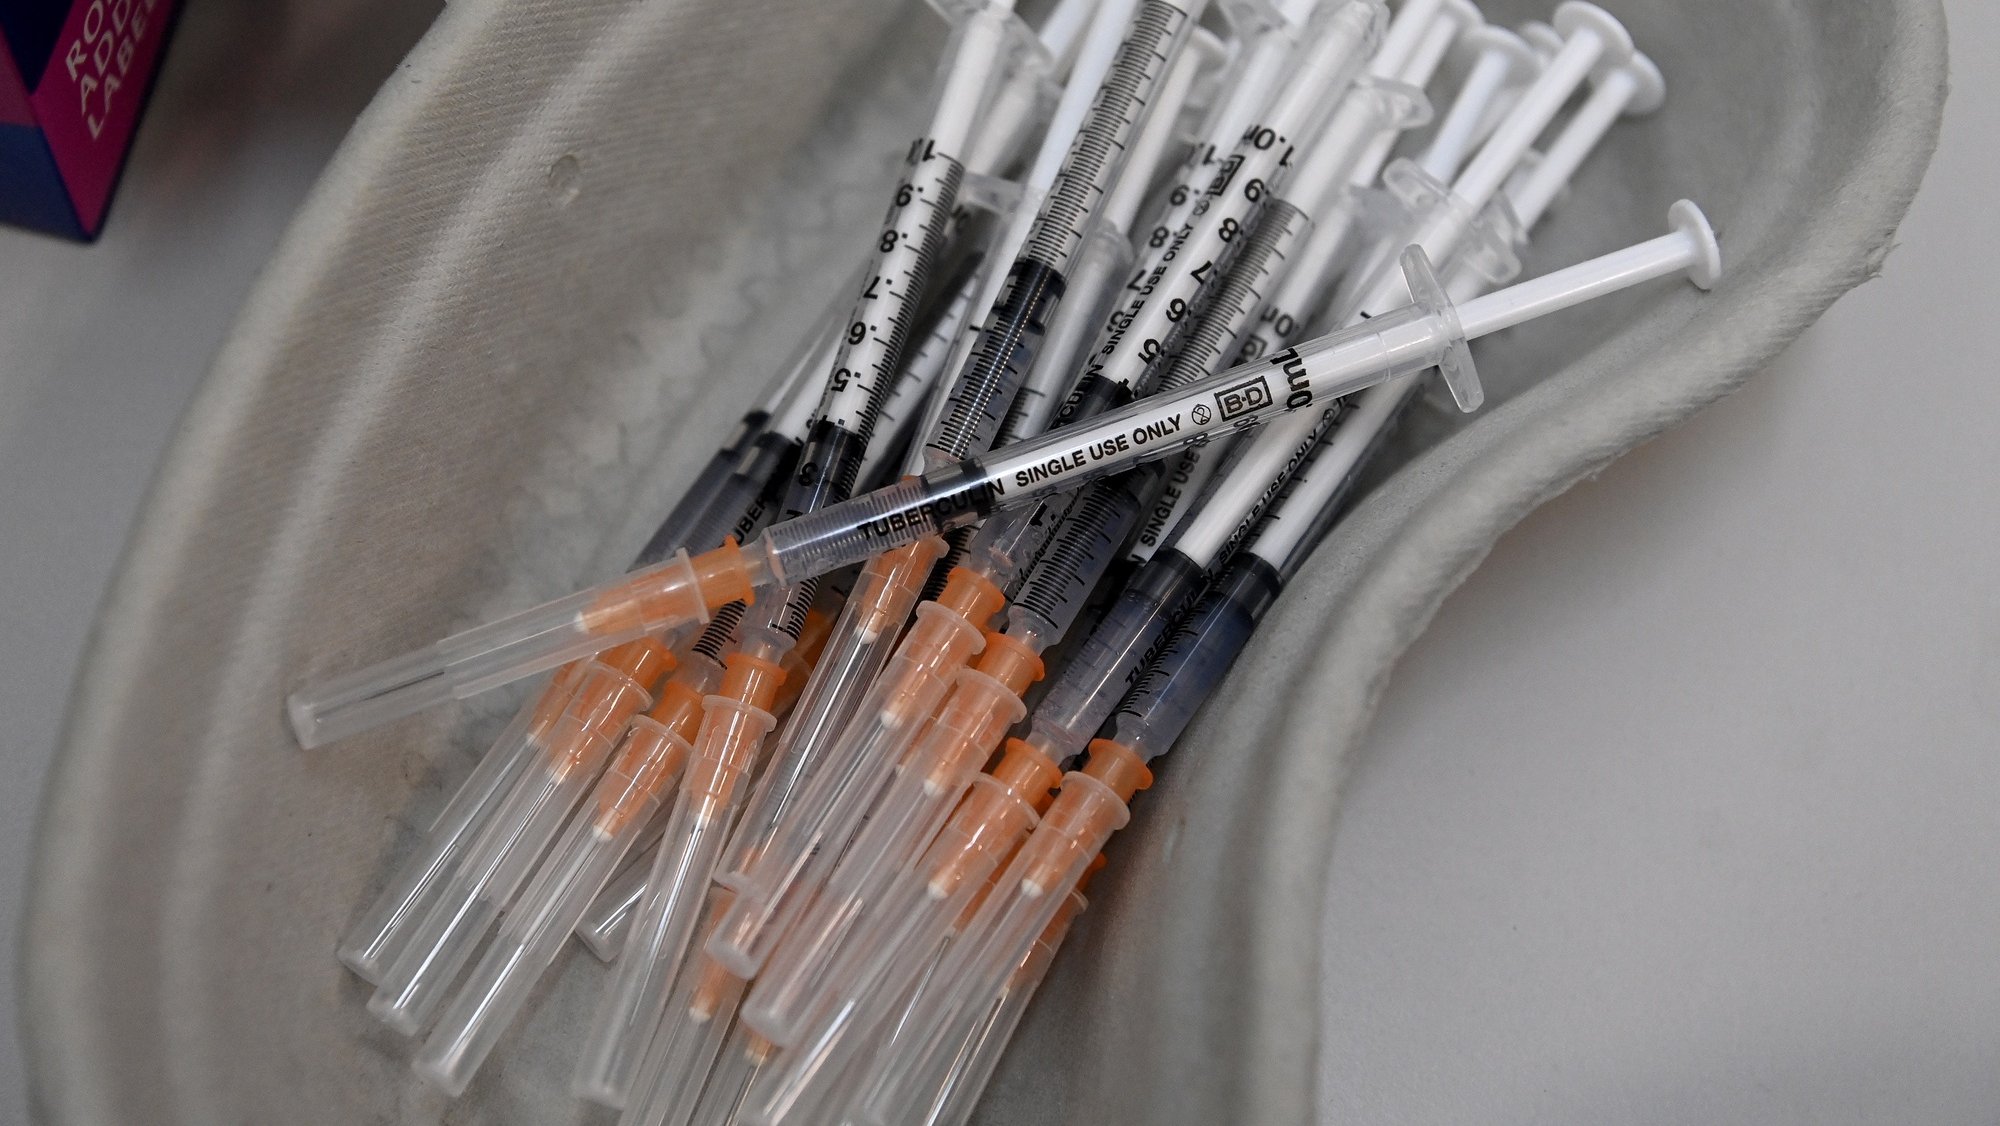 epa09433159 Syringes filled with Pfizer COVID-19 vaccine at the Belmore Medical GP in the suburb of Belmore, Australia, 28 August 2021. Dr Jamal Rifi from Belmore Medical GP will be providing second doses to people who paid for their Pfizer vaccine at a GP clinic in Campsie.  EPA/BIANCA DE MARCHI AUSTRALIA AND NEW ZEALAND OUT